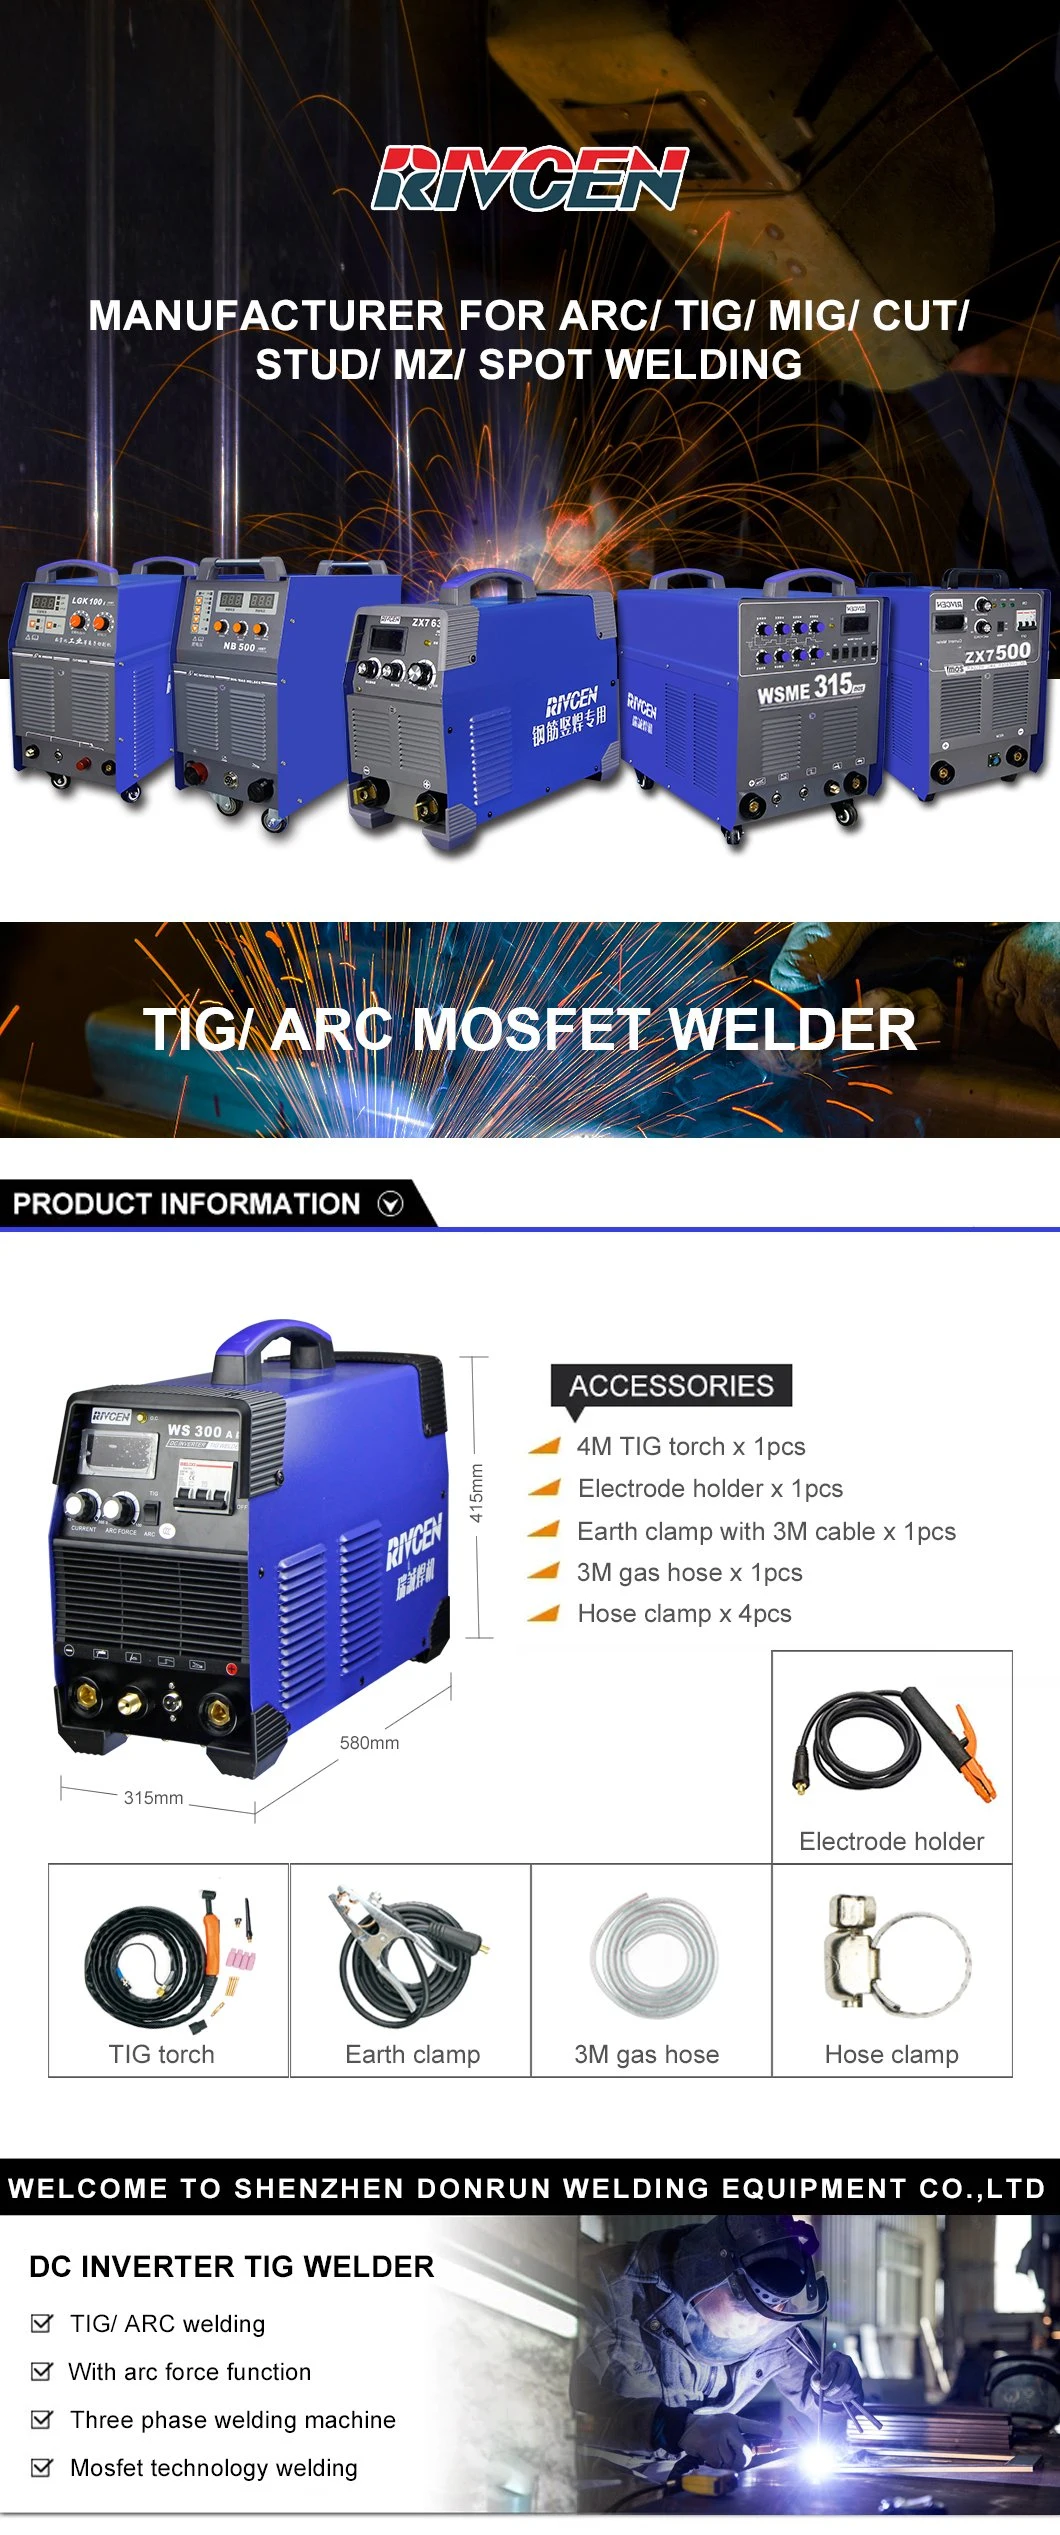 Arc/ TIG Double Function MOS DC Inverter Welding Machine with Arc Force Function